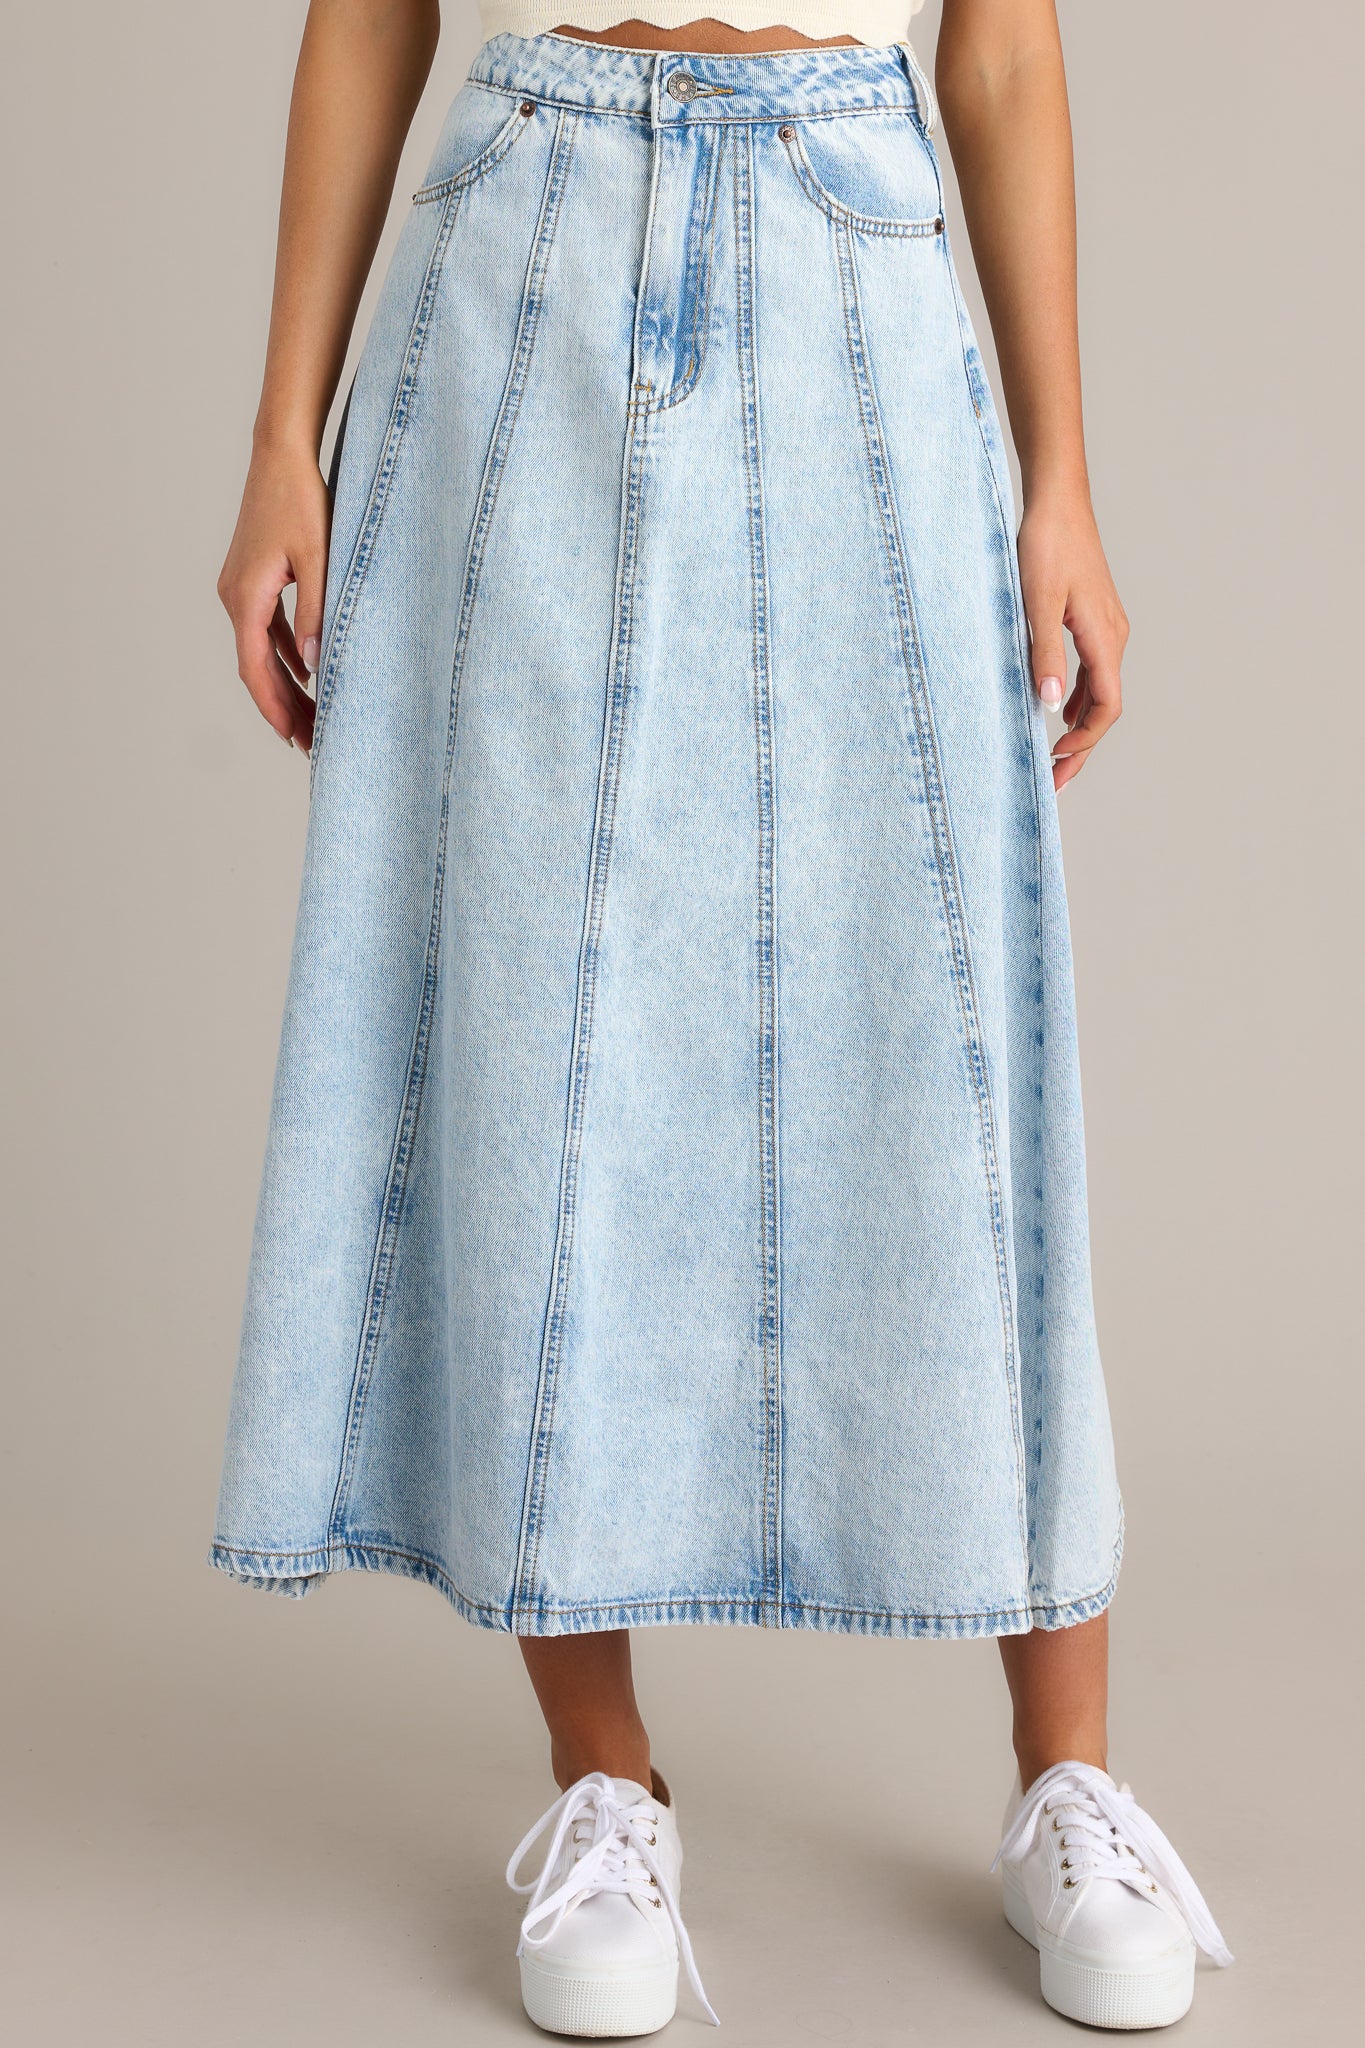 Front view of a light wash denim skirt featuring a high waisted design, functional belt loops, a button zipper closure, and functional hip and back pockets.